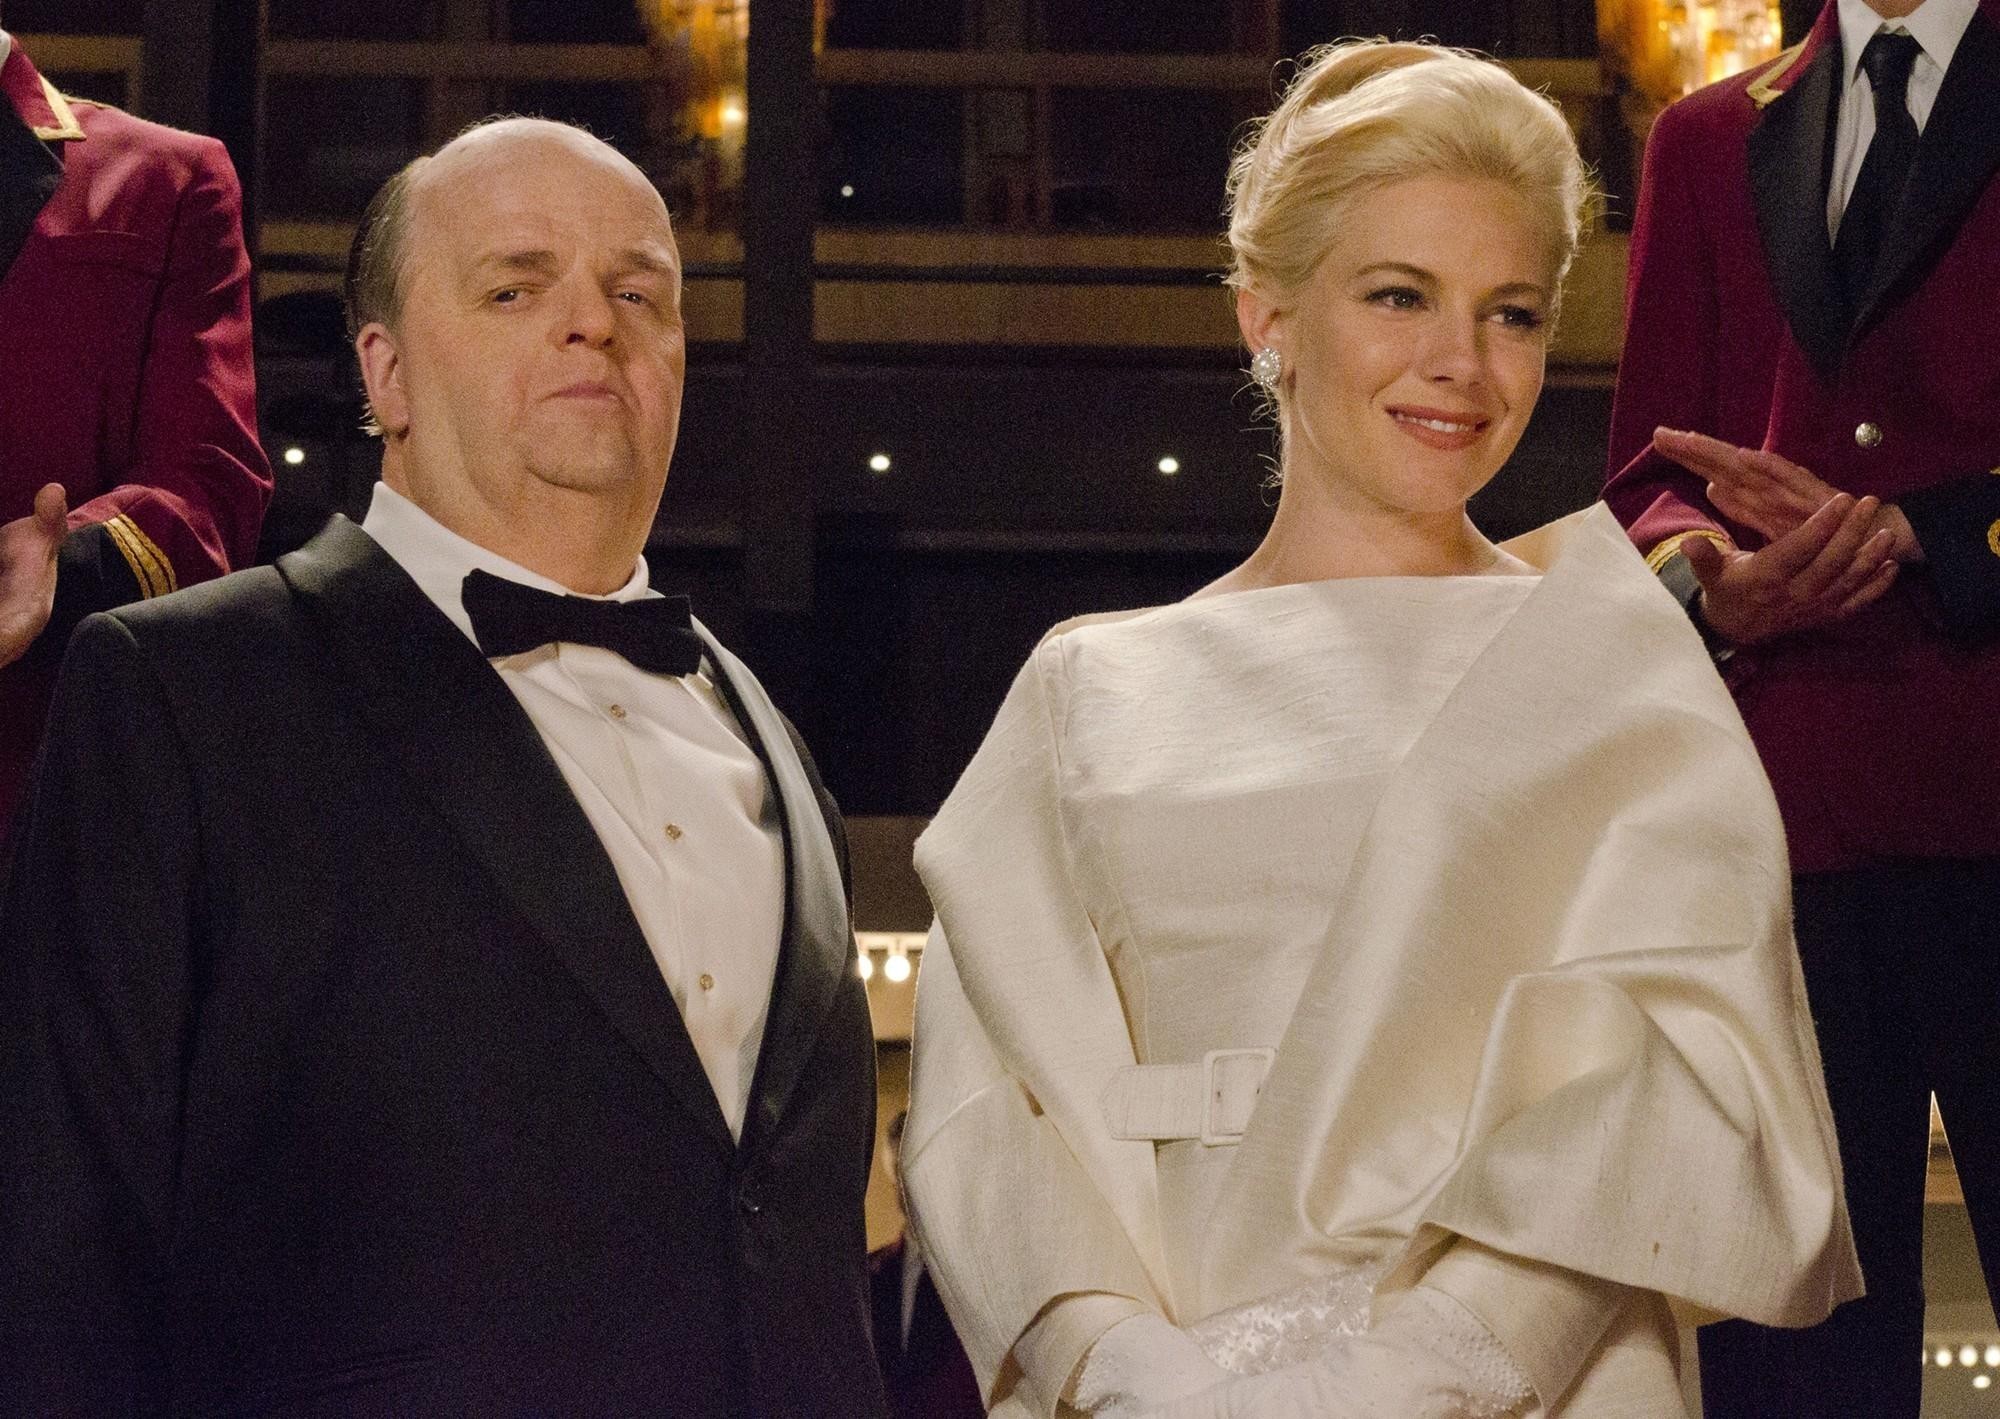 Toby Jones stars as Alfred Hitchcock and Sienna Miller stars as Tippi Hedren in HBO Films' The Girl (2012)